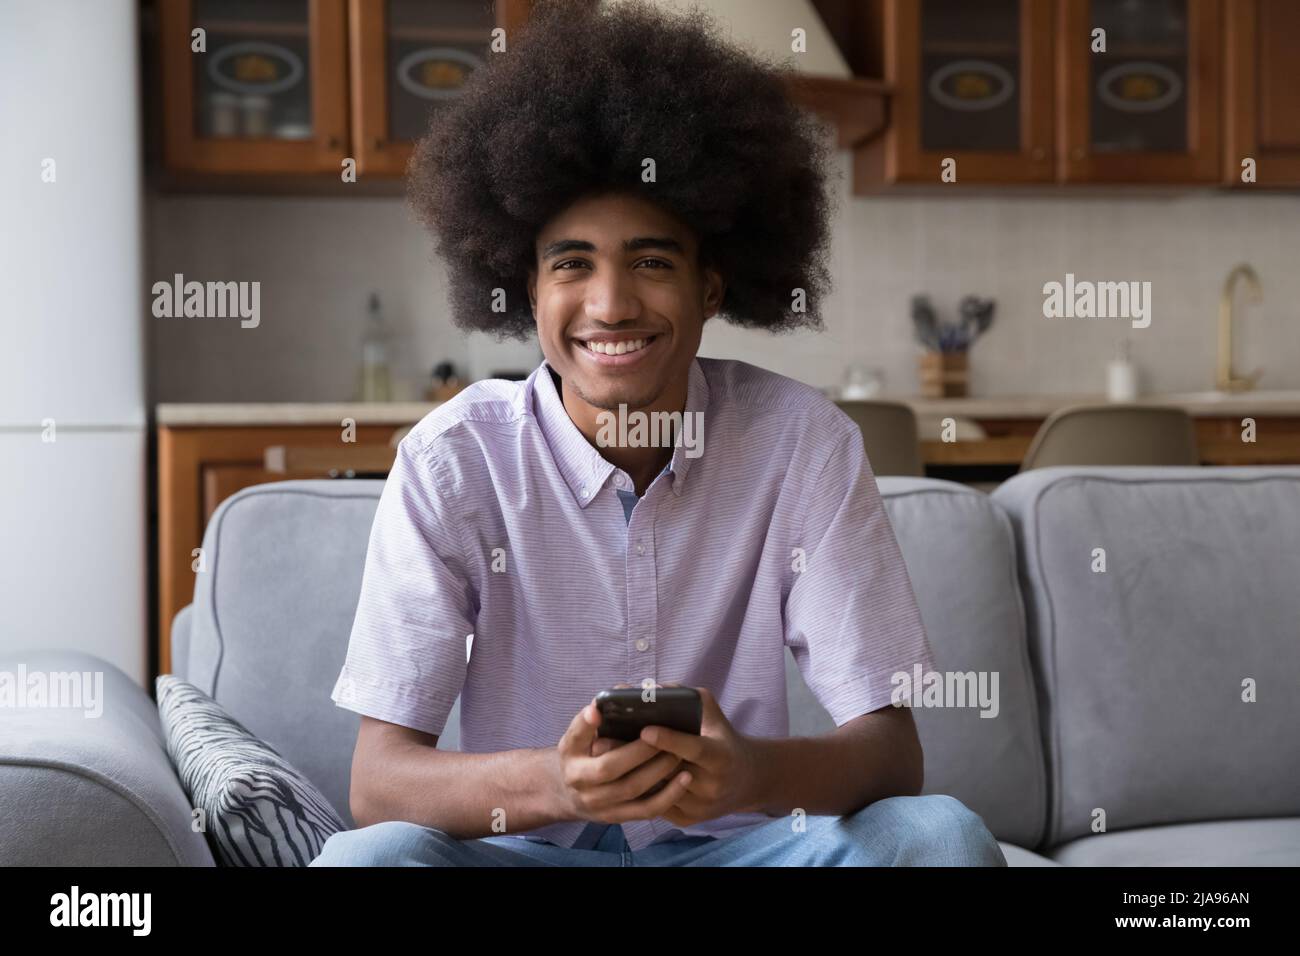 Happy guy with long fuzzy curly hair using smartphone Stock Photo